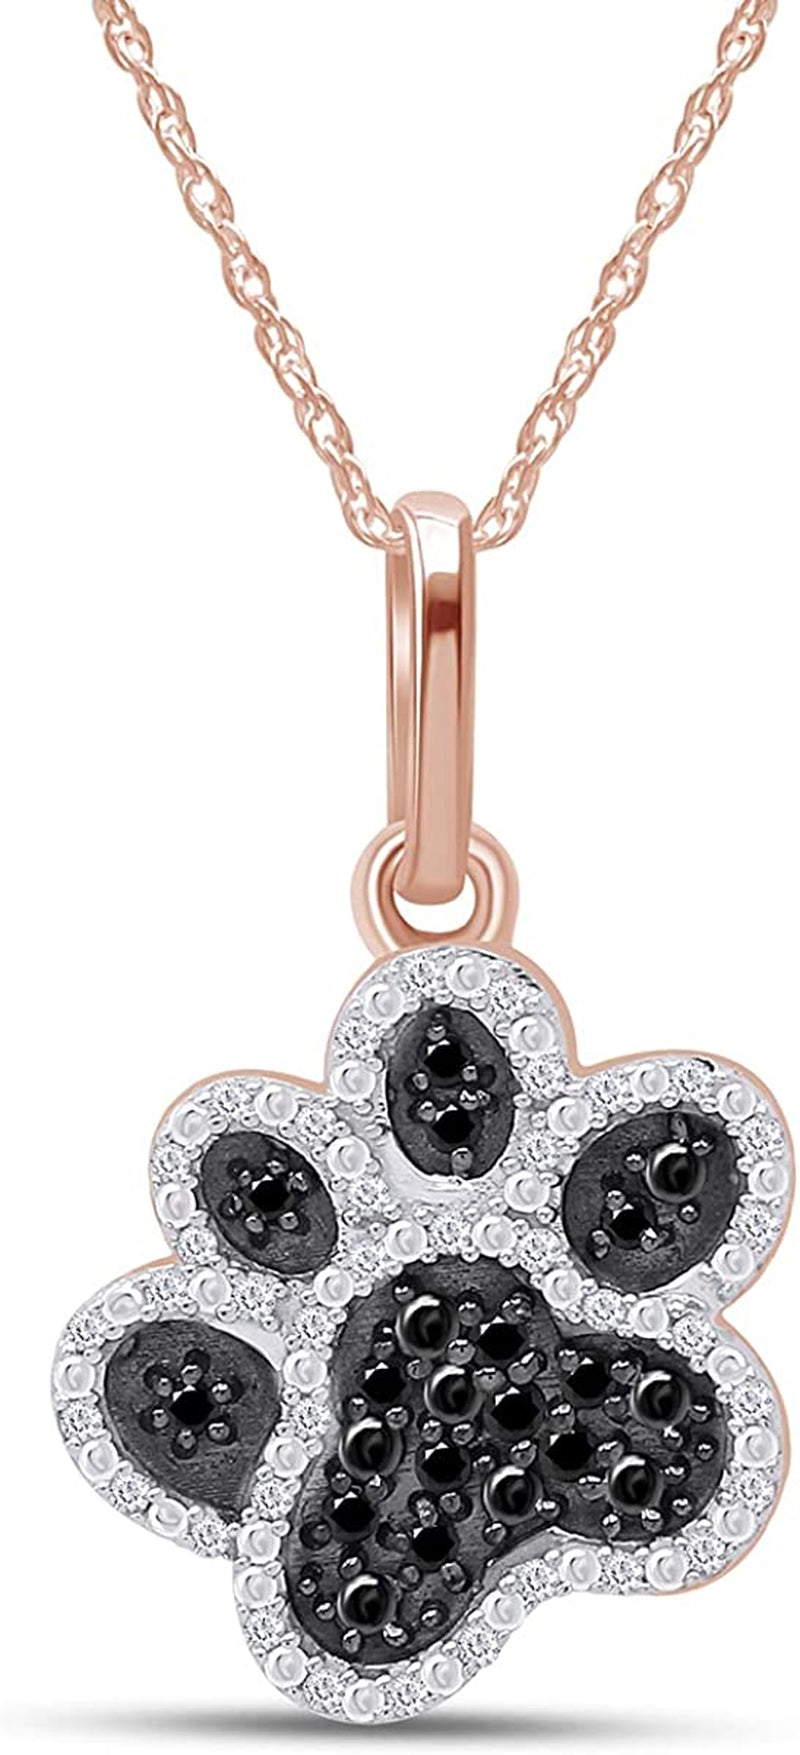 1/5 Carat round Cut Black & White Natural Diamond Dog Paw Pendant Necklace along with 18" Chain in 14K Gold over Sterling Silver (I2-I3 Clarity, 0.20 Cttw)